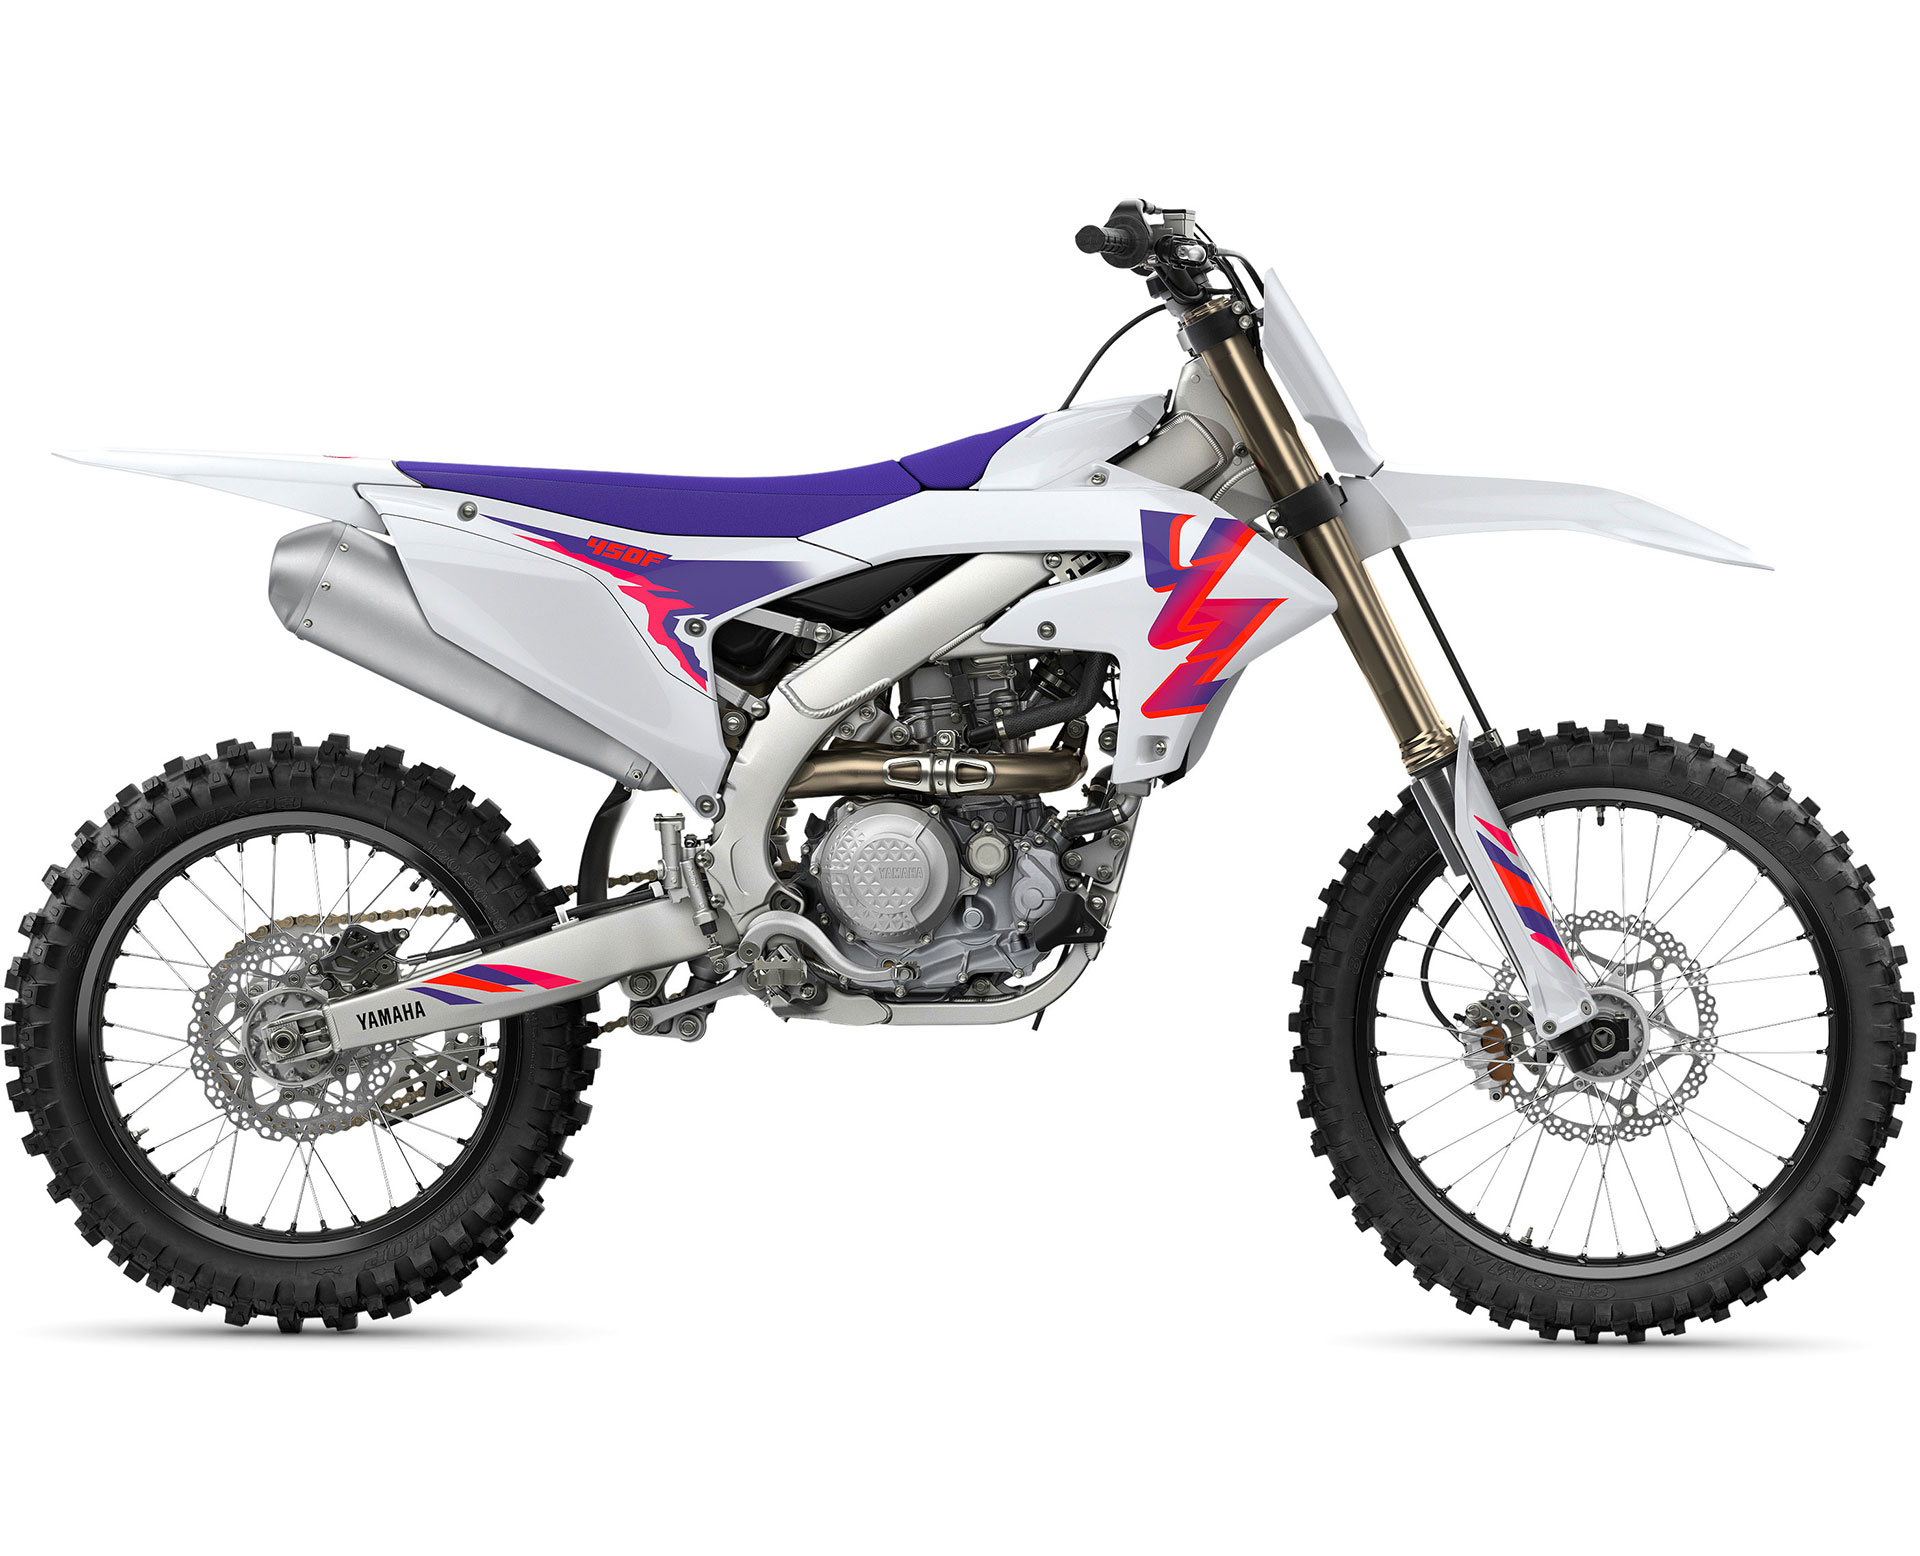 Thumbnail of your customized YZ450F 2024